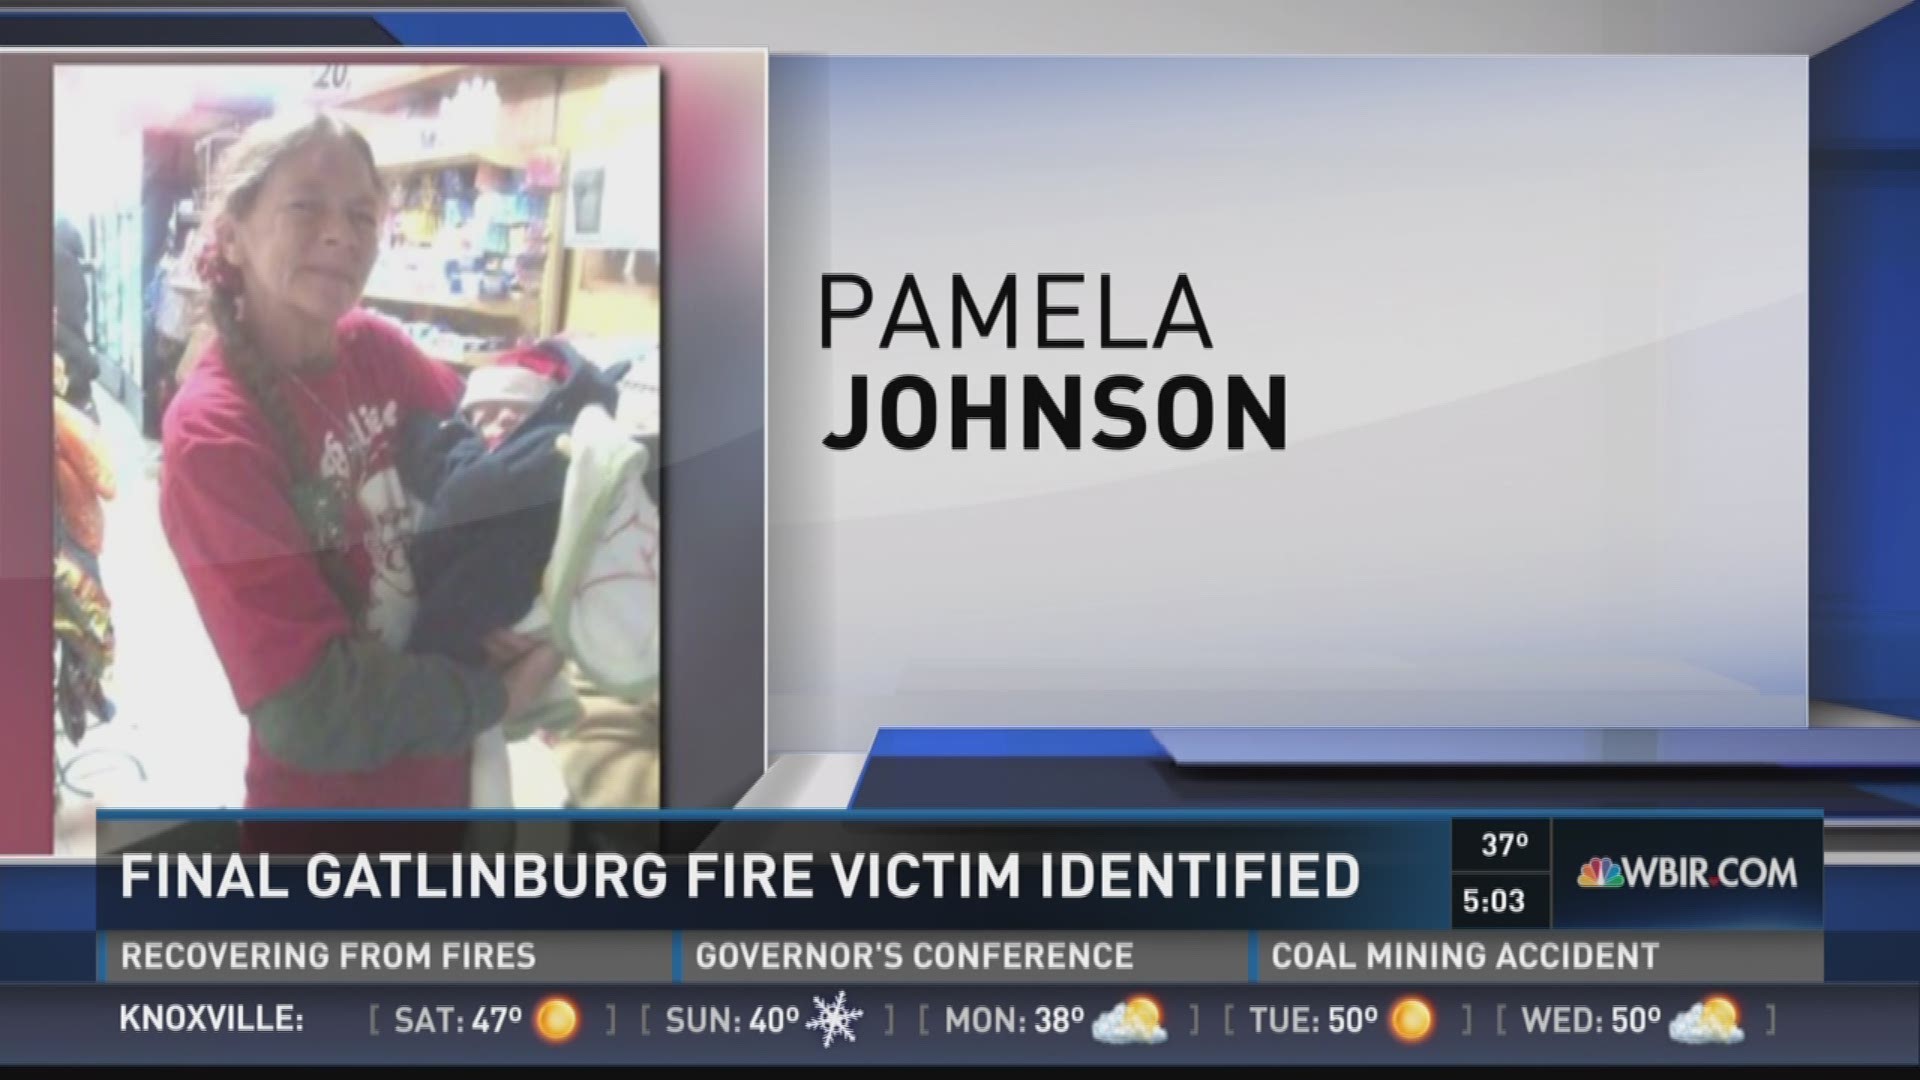 The family of Pamela Johnson said they were notified on Friday that DNA confirmed that she was last unidentied victim of the fires.